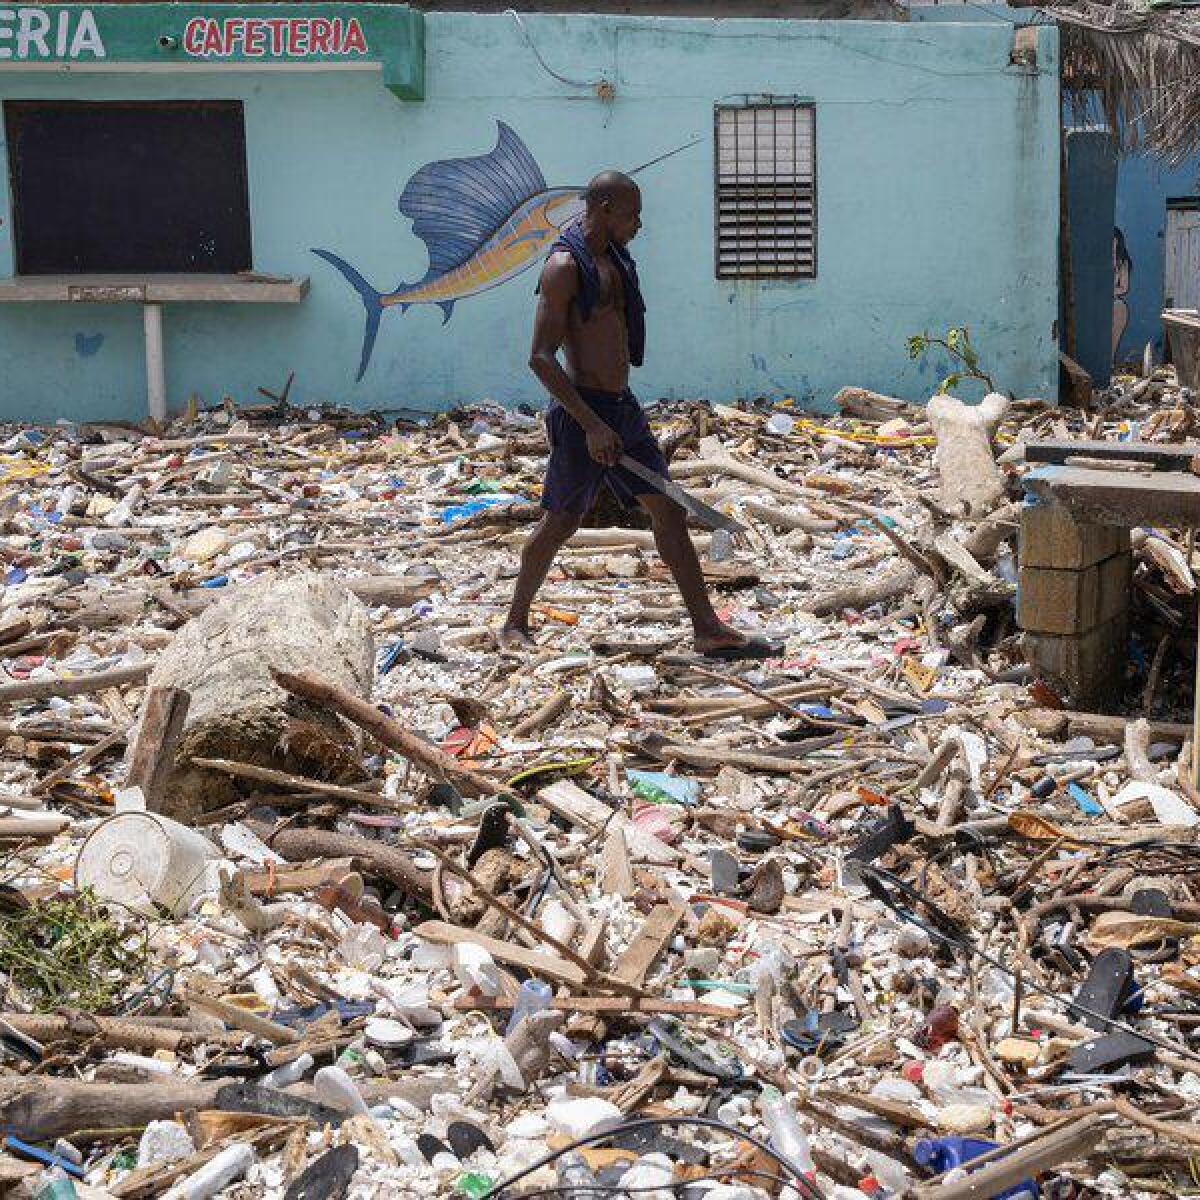 A man walks on a beach covered with garbage in the Dominican Republic